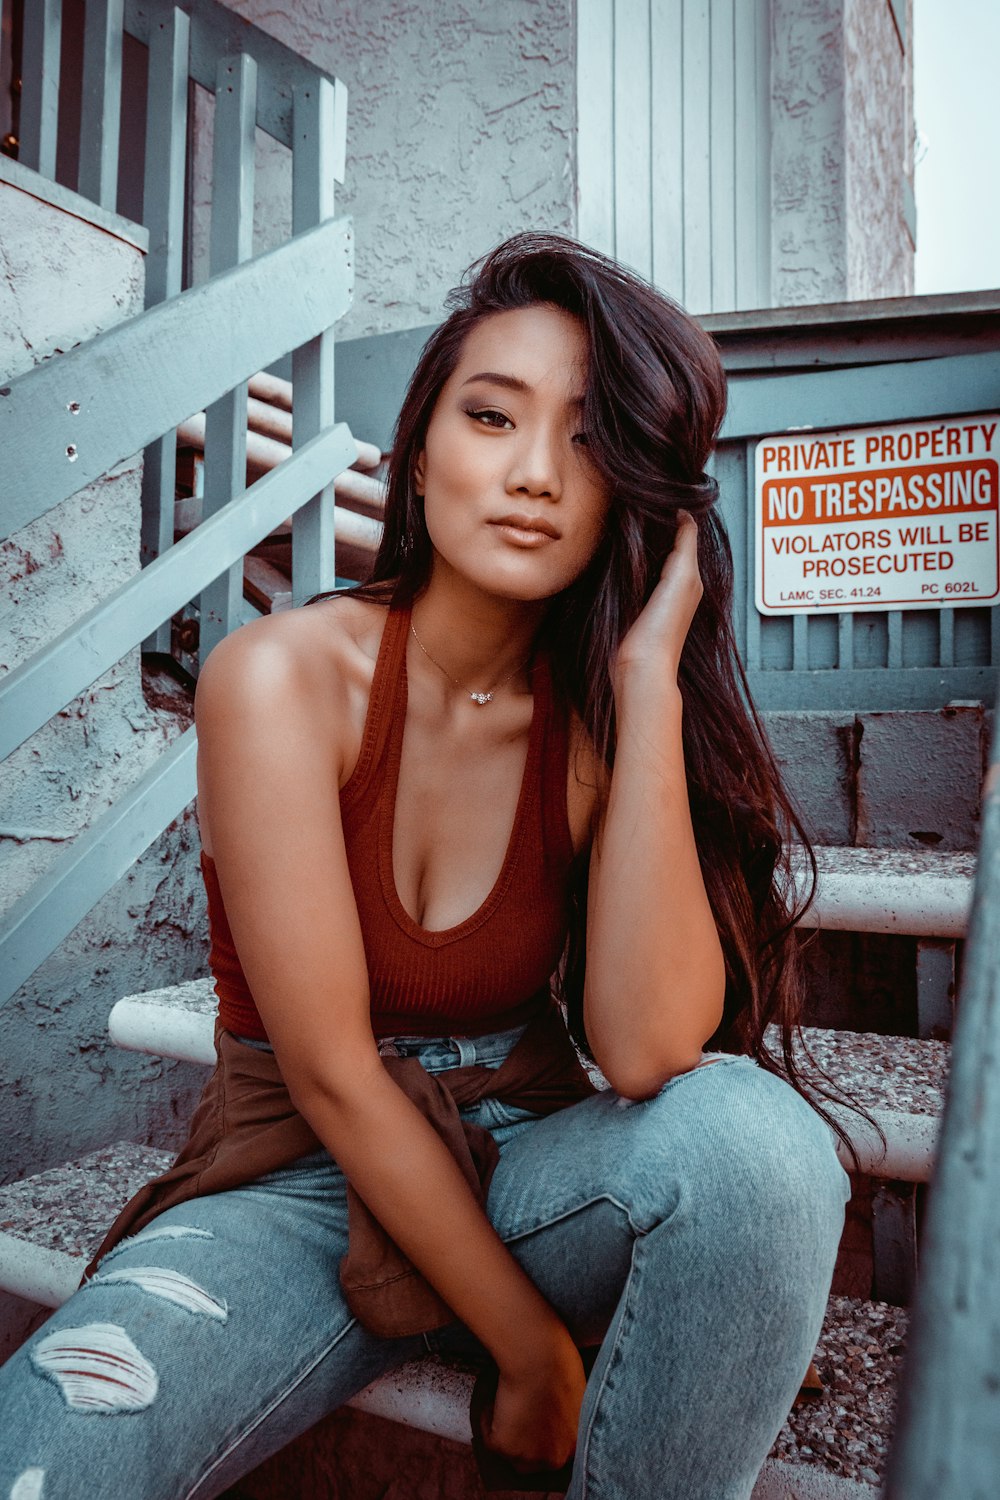 Woman in red tank top and blue denim jeans sitting on gray wooden bench  photo – Free Model photo Image on Unsplash